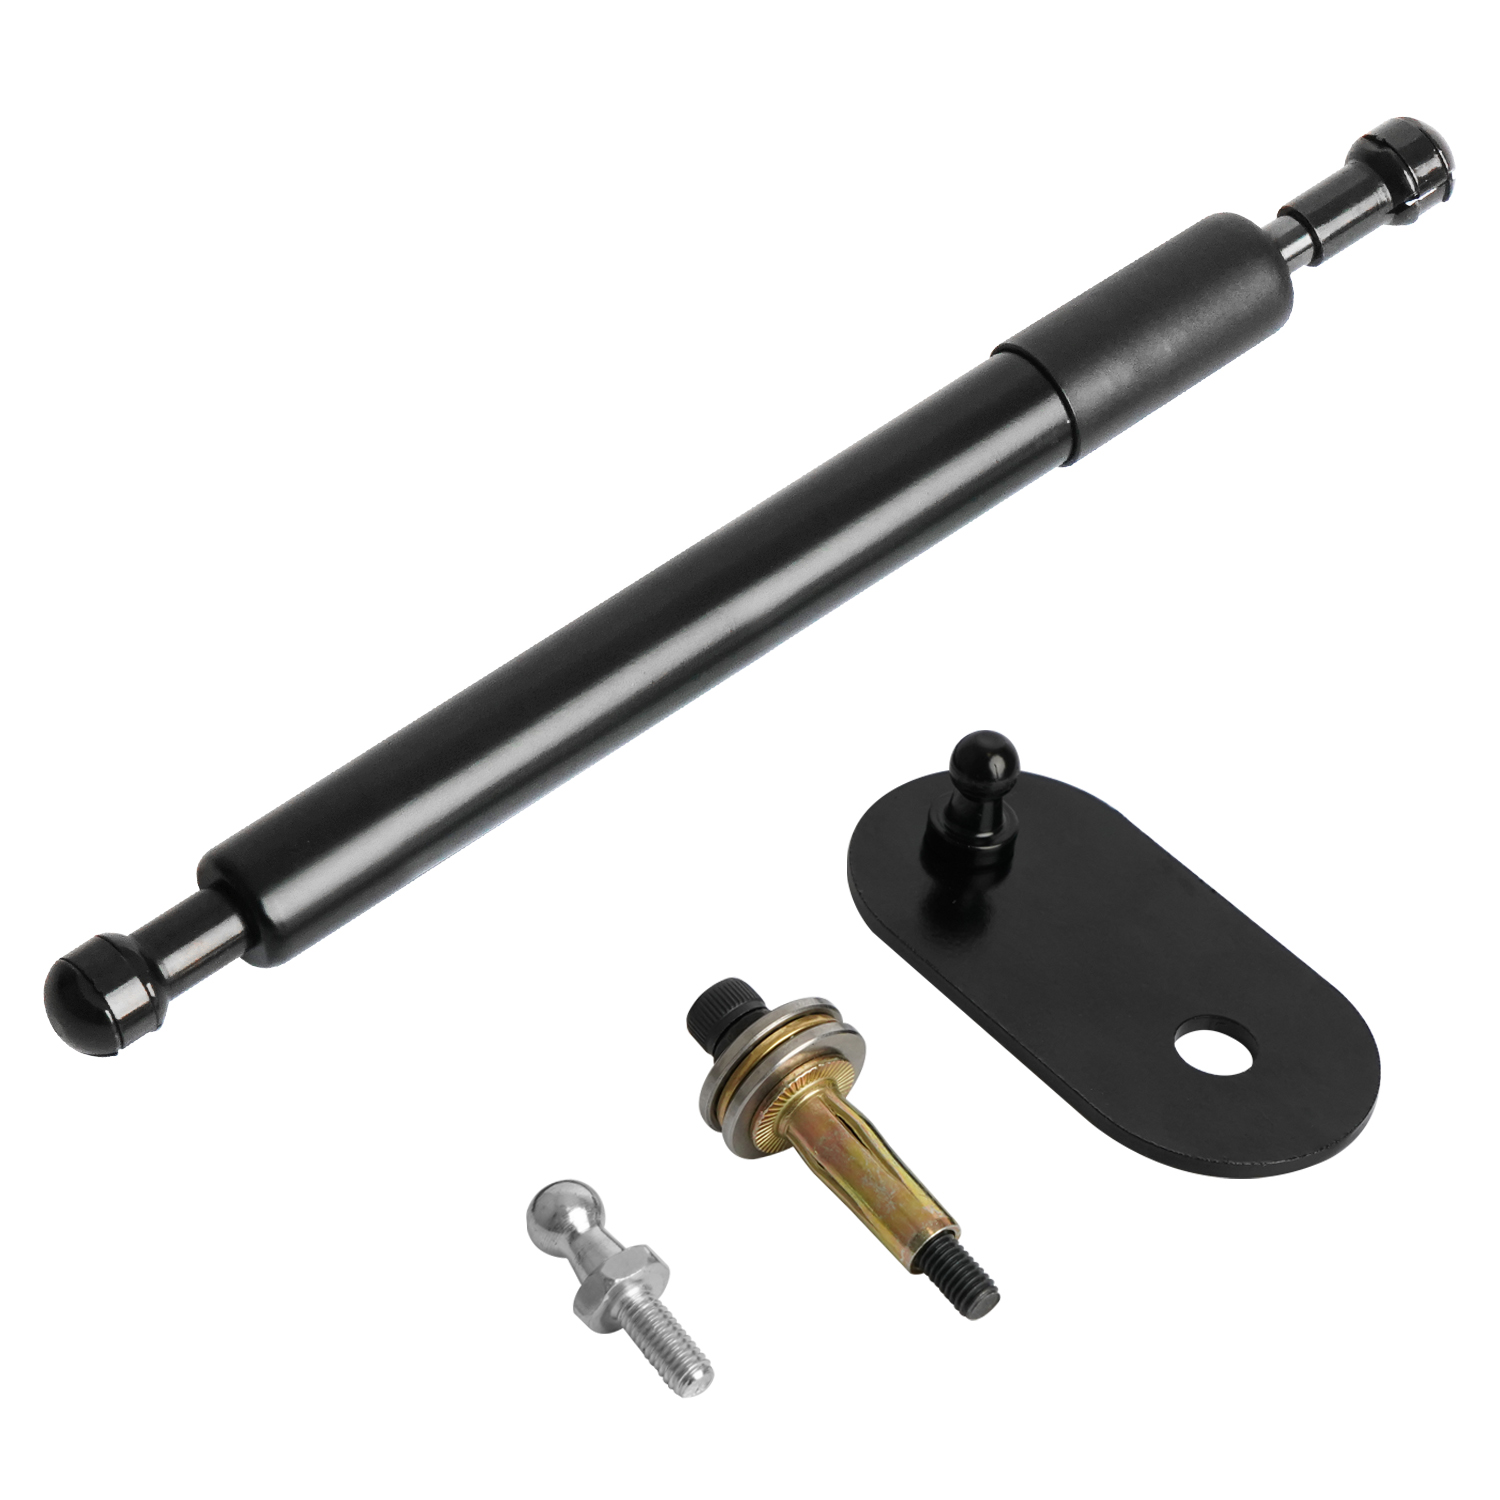 2008-2016 Ford F-450 Super Duty Pick Up Struts Shocks Dampers 43203 1999-2016 Ford F-250/F-350 Super Duty Beneges Truck Tailgate Assist Kit for 1997-2003 Ford F-150 2004 Ford F-150 Heritage 